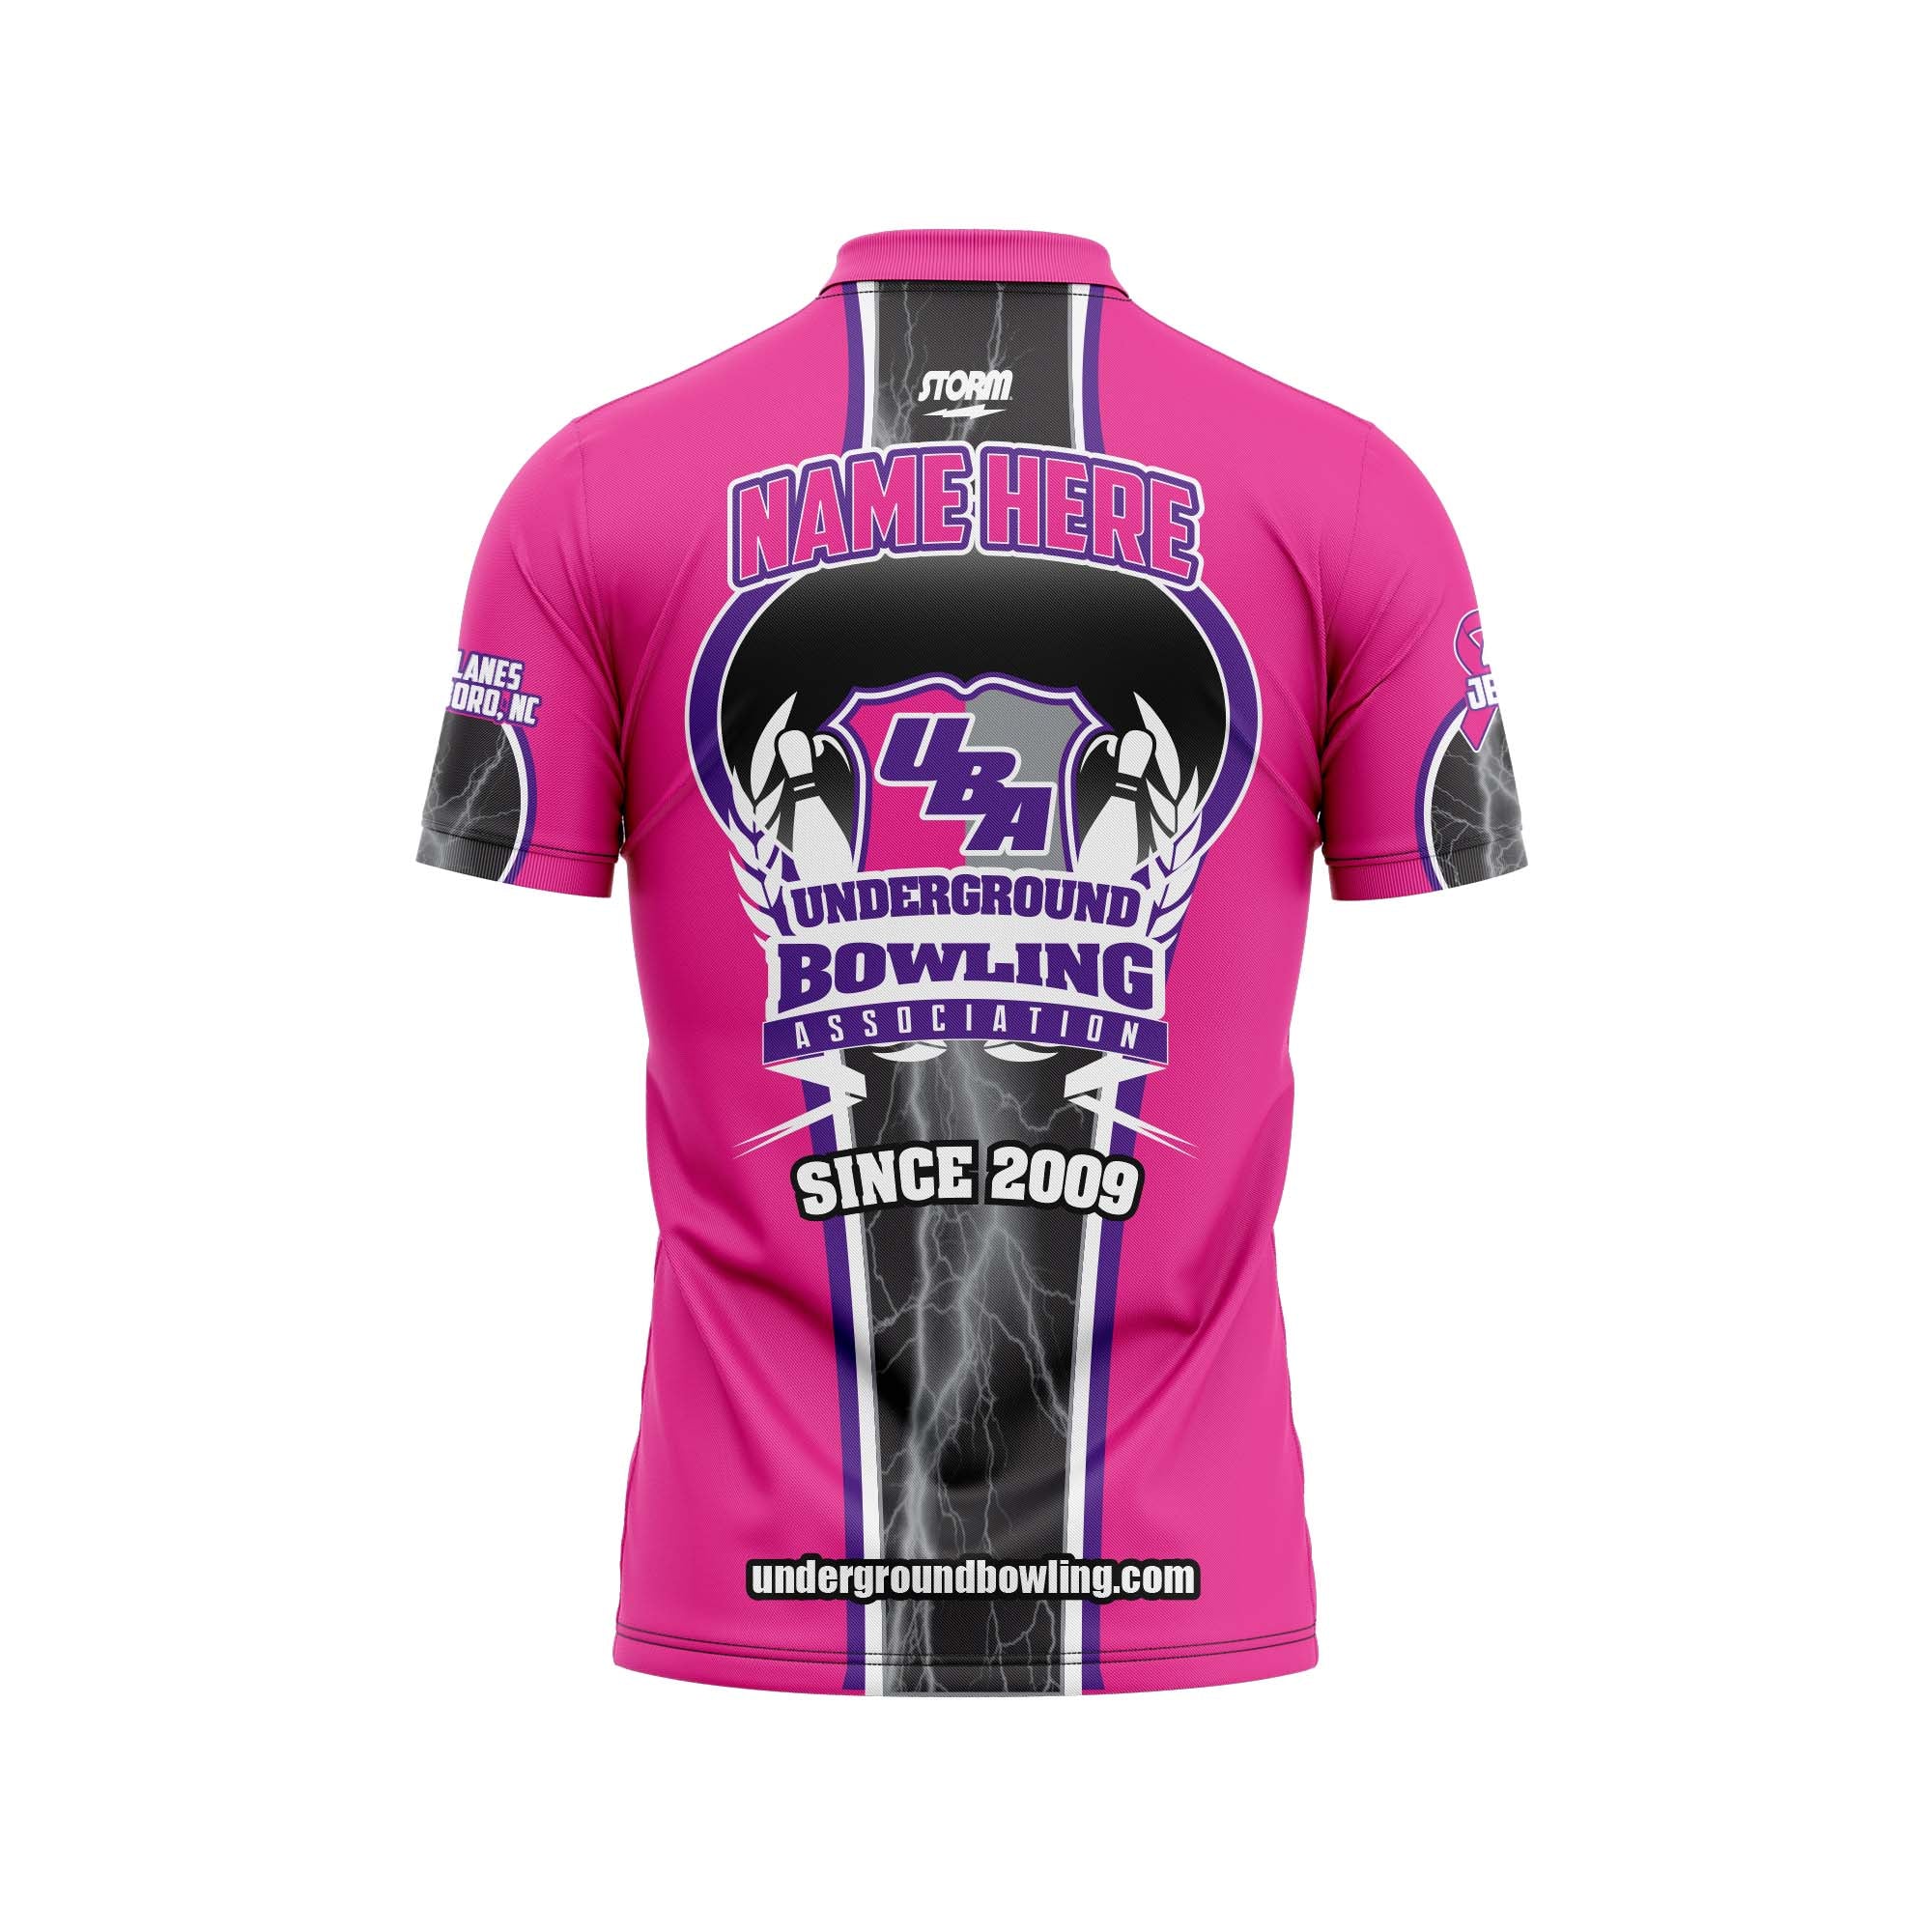 Taking Care Of Business Breast Cancer Jersey